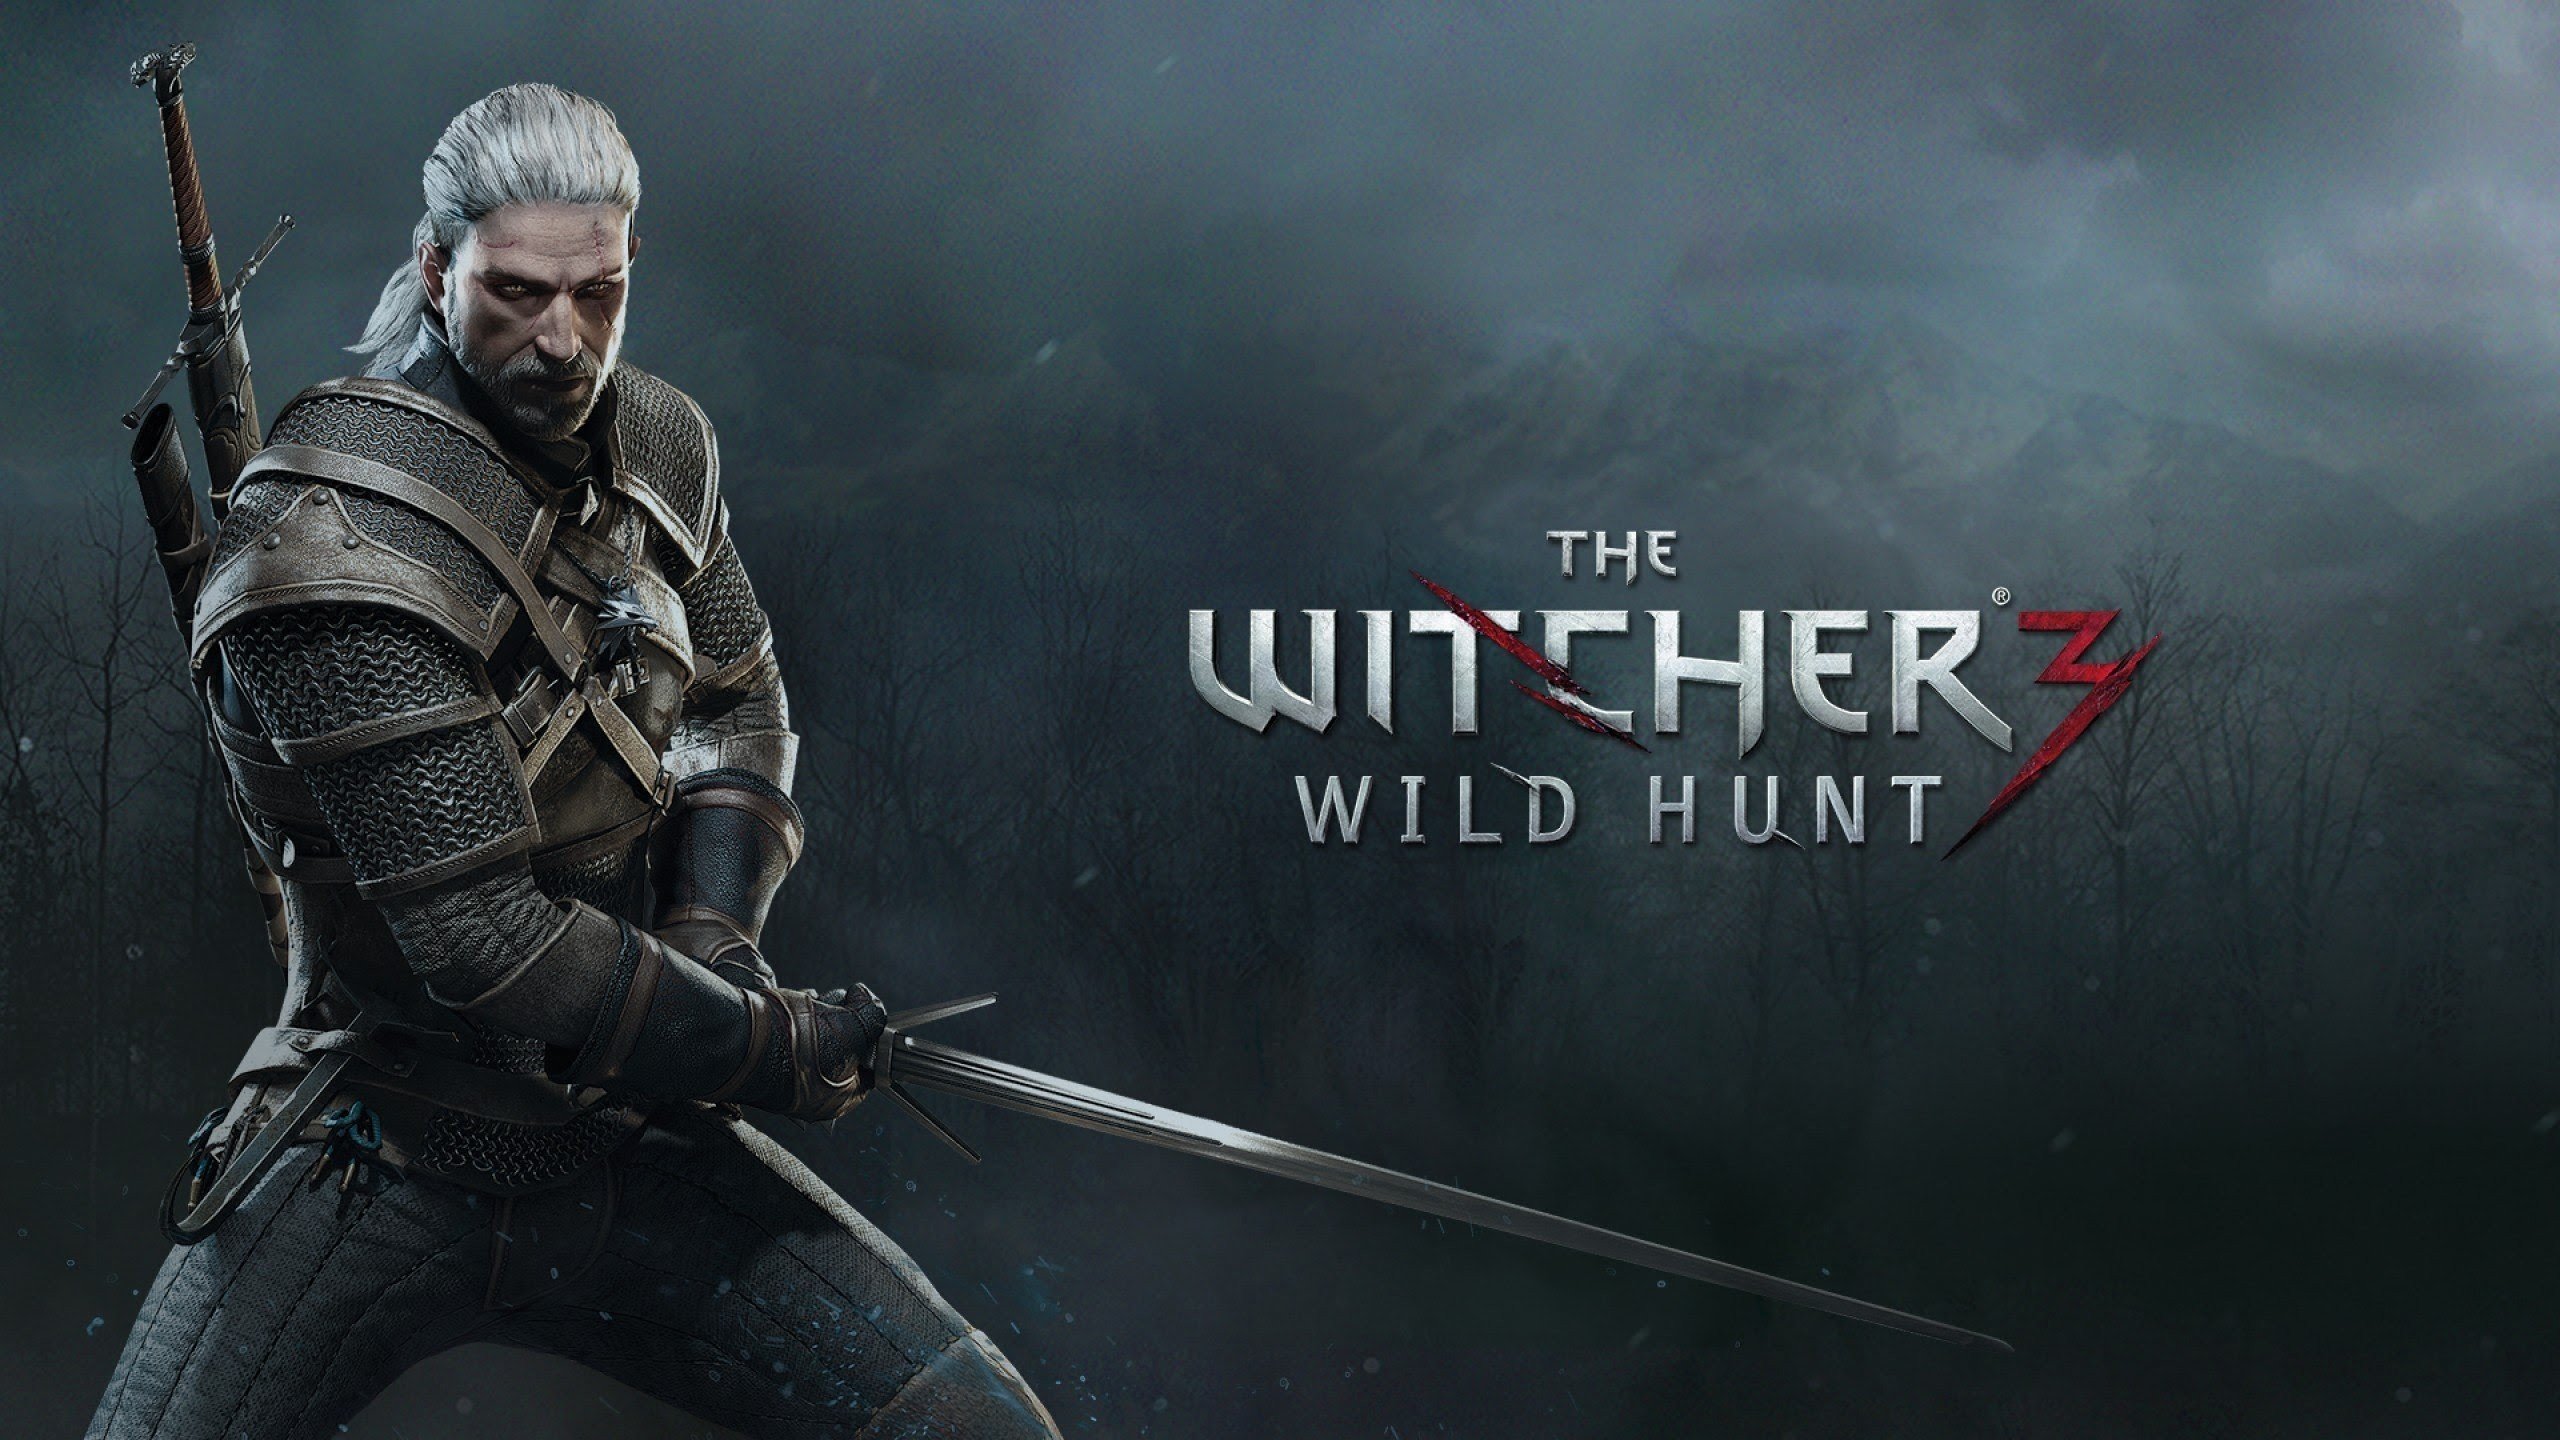 Geralt of Rivia, The Witcher, The Witcher 3: Wild Hunt, Video games